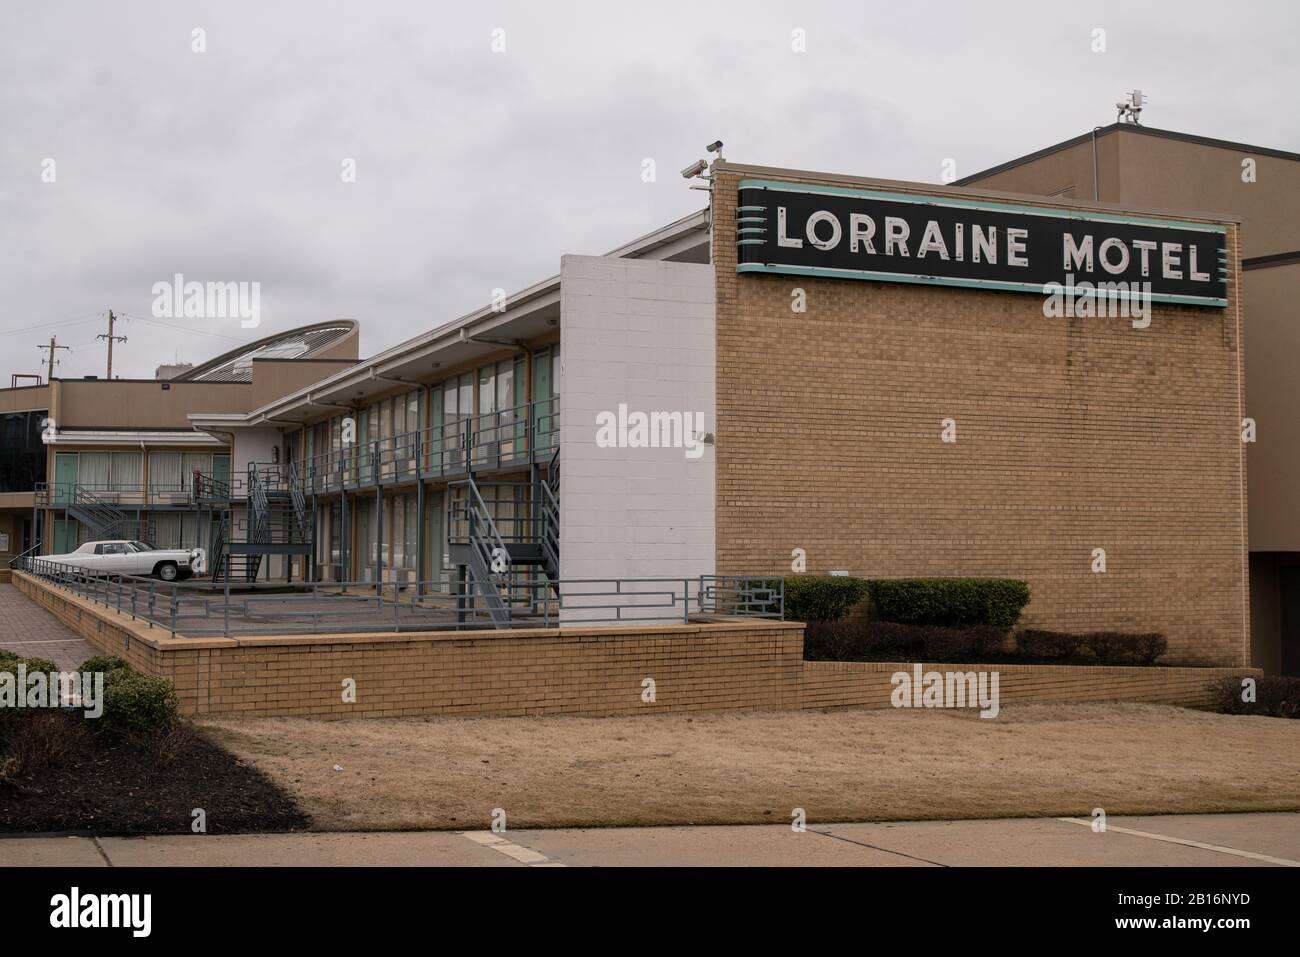 Memphis, Tennessee - January 27, 2020: National Civil Rights Museum logo at the Lorraine Motel, location of MLK assassination Stock Photo